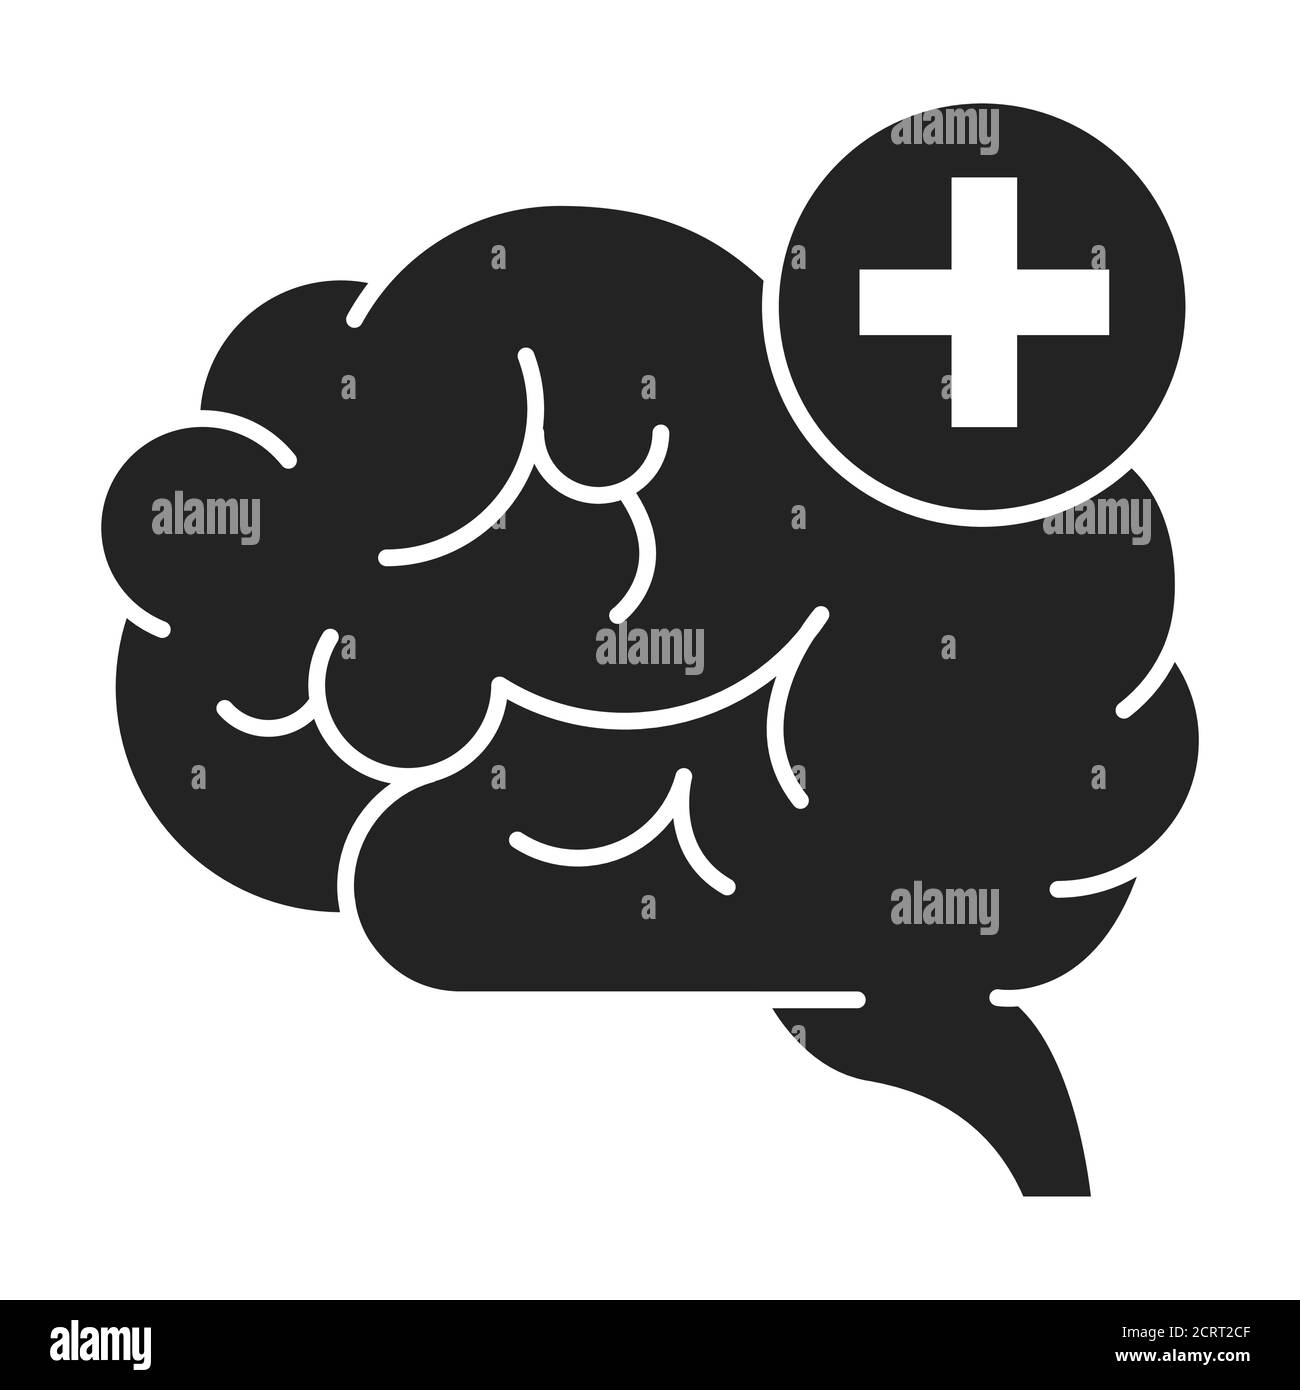 Improving brain activity black glyph icon. Exercising the brain to improve memory, focus, or daily functionality. Pictogram for web page, mobile app Stock Vector